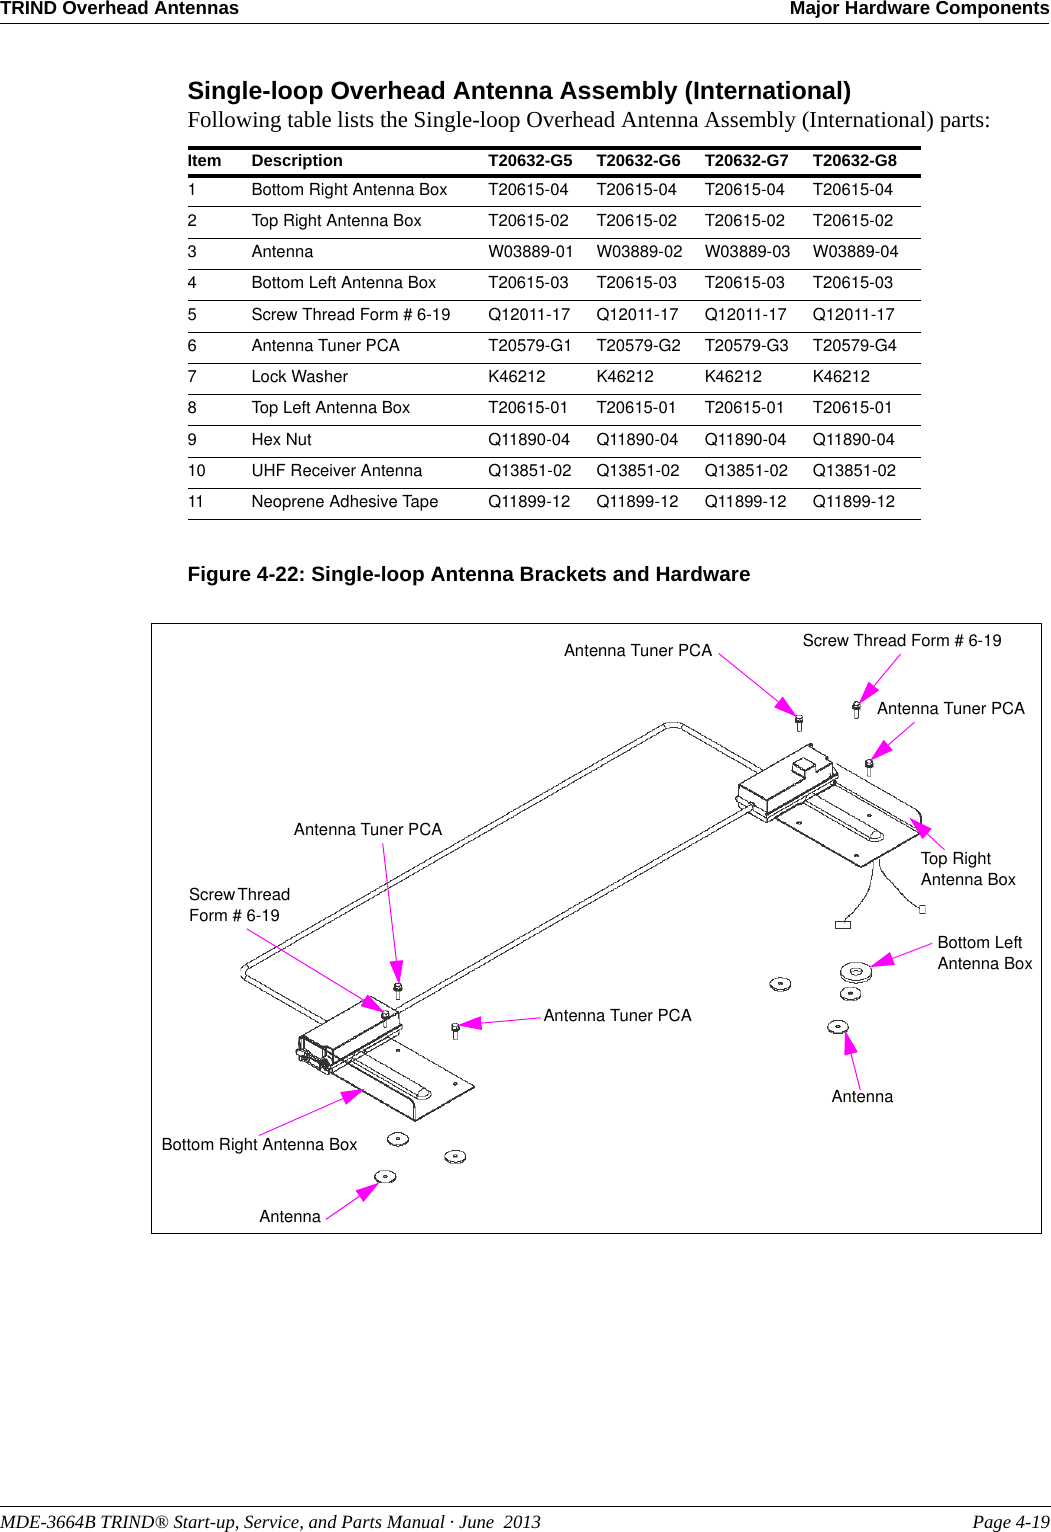 MDE-3664B TRIND® Start-up, Service, and Parts Manual · June  2013 Page 4-19TRIND Overhead Antennas Major Hardware ComponentsSingle-loop Overhead Antenna Assembly (International)Following table lists the Single-loop Overhead Antenna Assembly (International) parts:Item Description T20632-G5 T20632-G6 T20632-G7 T20632-G81Bottom Right Antenna Box T20615-04 T20615-04 T20615-04 T20615-042Top Right Antenna Box T20615-02 T20615-02 T20615-02 T20615-023Antenna W03889-01 W03889-02 W03889-03 W03889-044Bottom Left Antenna Box T20615-03 T20615-03 T20615-03 T20615-035Screw Thread Form # 6-19 Q12011-17 Q12011-17 Q12011-17 Q12011-176Antenna Tuner PCA T20579-G1 T20579-G2 T20579-G3 T20579-G47Lock Washer K46212 K46212 K46212 K462128Top Left Antenna Box T20615-01 T20615-01 T20615-01 T20615-019Hex Nut Q11890-04 Q11890-04 Q11890-04 Q11890-0410 UHF Receiver Antenna Q13851-02 Q13851-02 Q13851-02 Q13851-0211 Neoprene Adhesive Tape Q11899-12 Q11899-12 Q11899-12 Q11899-12Figure 4-22: Single-loop Antenna Brackets and HardwareBottom Right Antenna BoxAntennaScrew Thread Form # 6-19Screw Thread Form # 6-19Antenna Tuner PCAAntenna Tuner PCAAntenna Tuner PCAAntenna Tuner PCATop RightAntenna BoxBottom LeftAntenna BoxAntenna